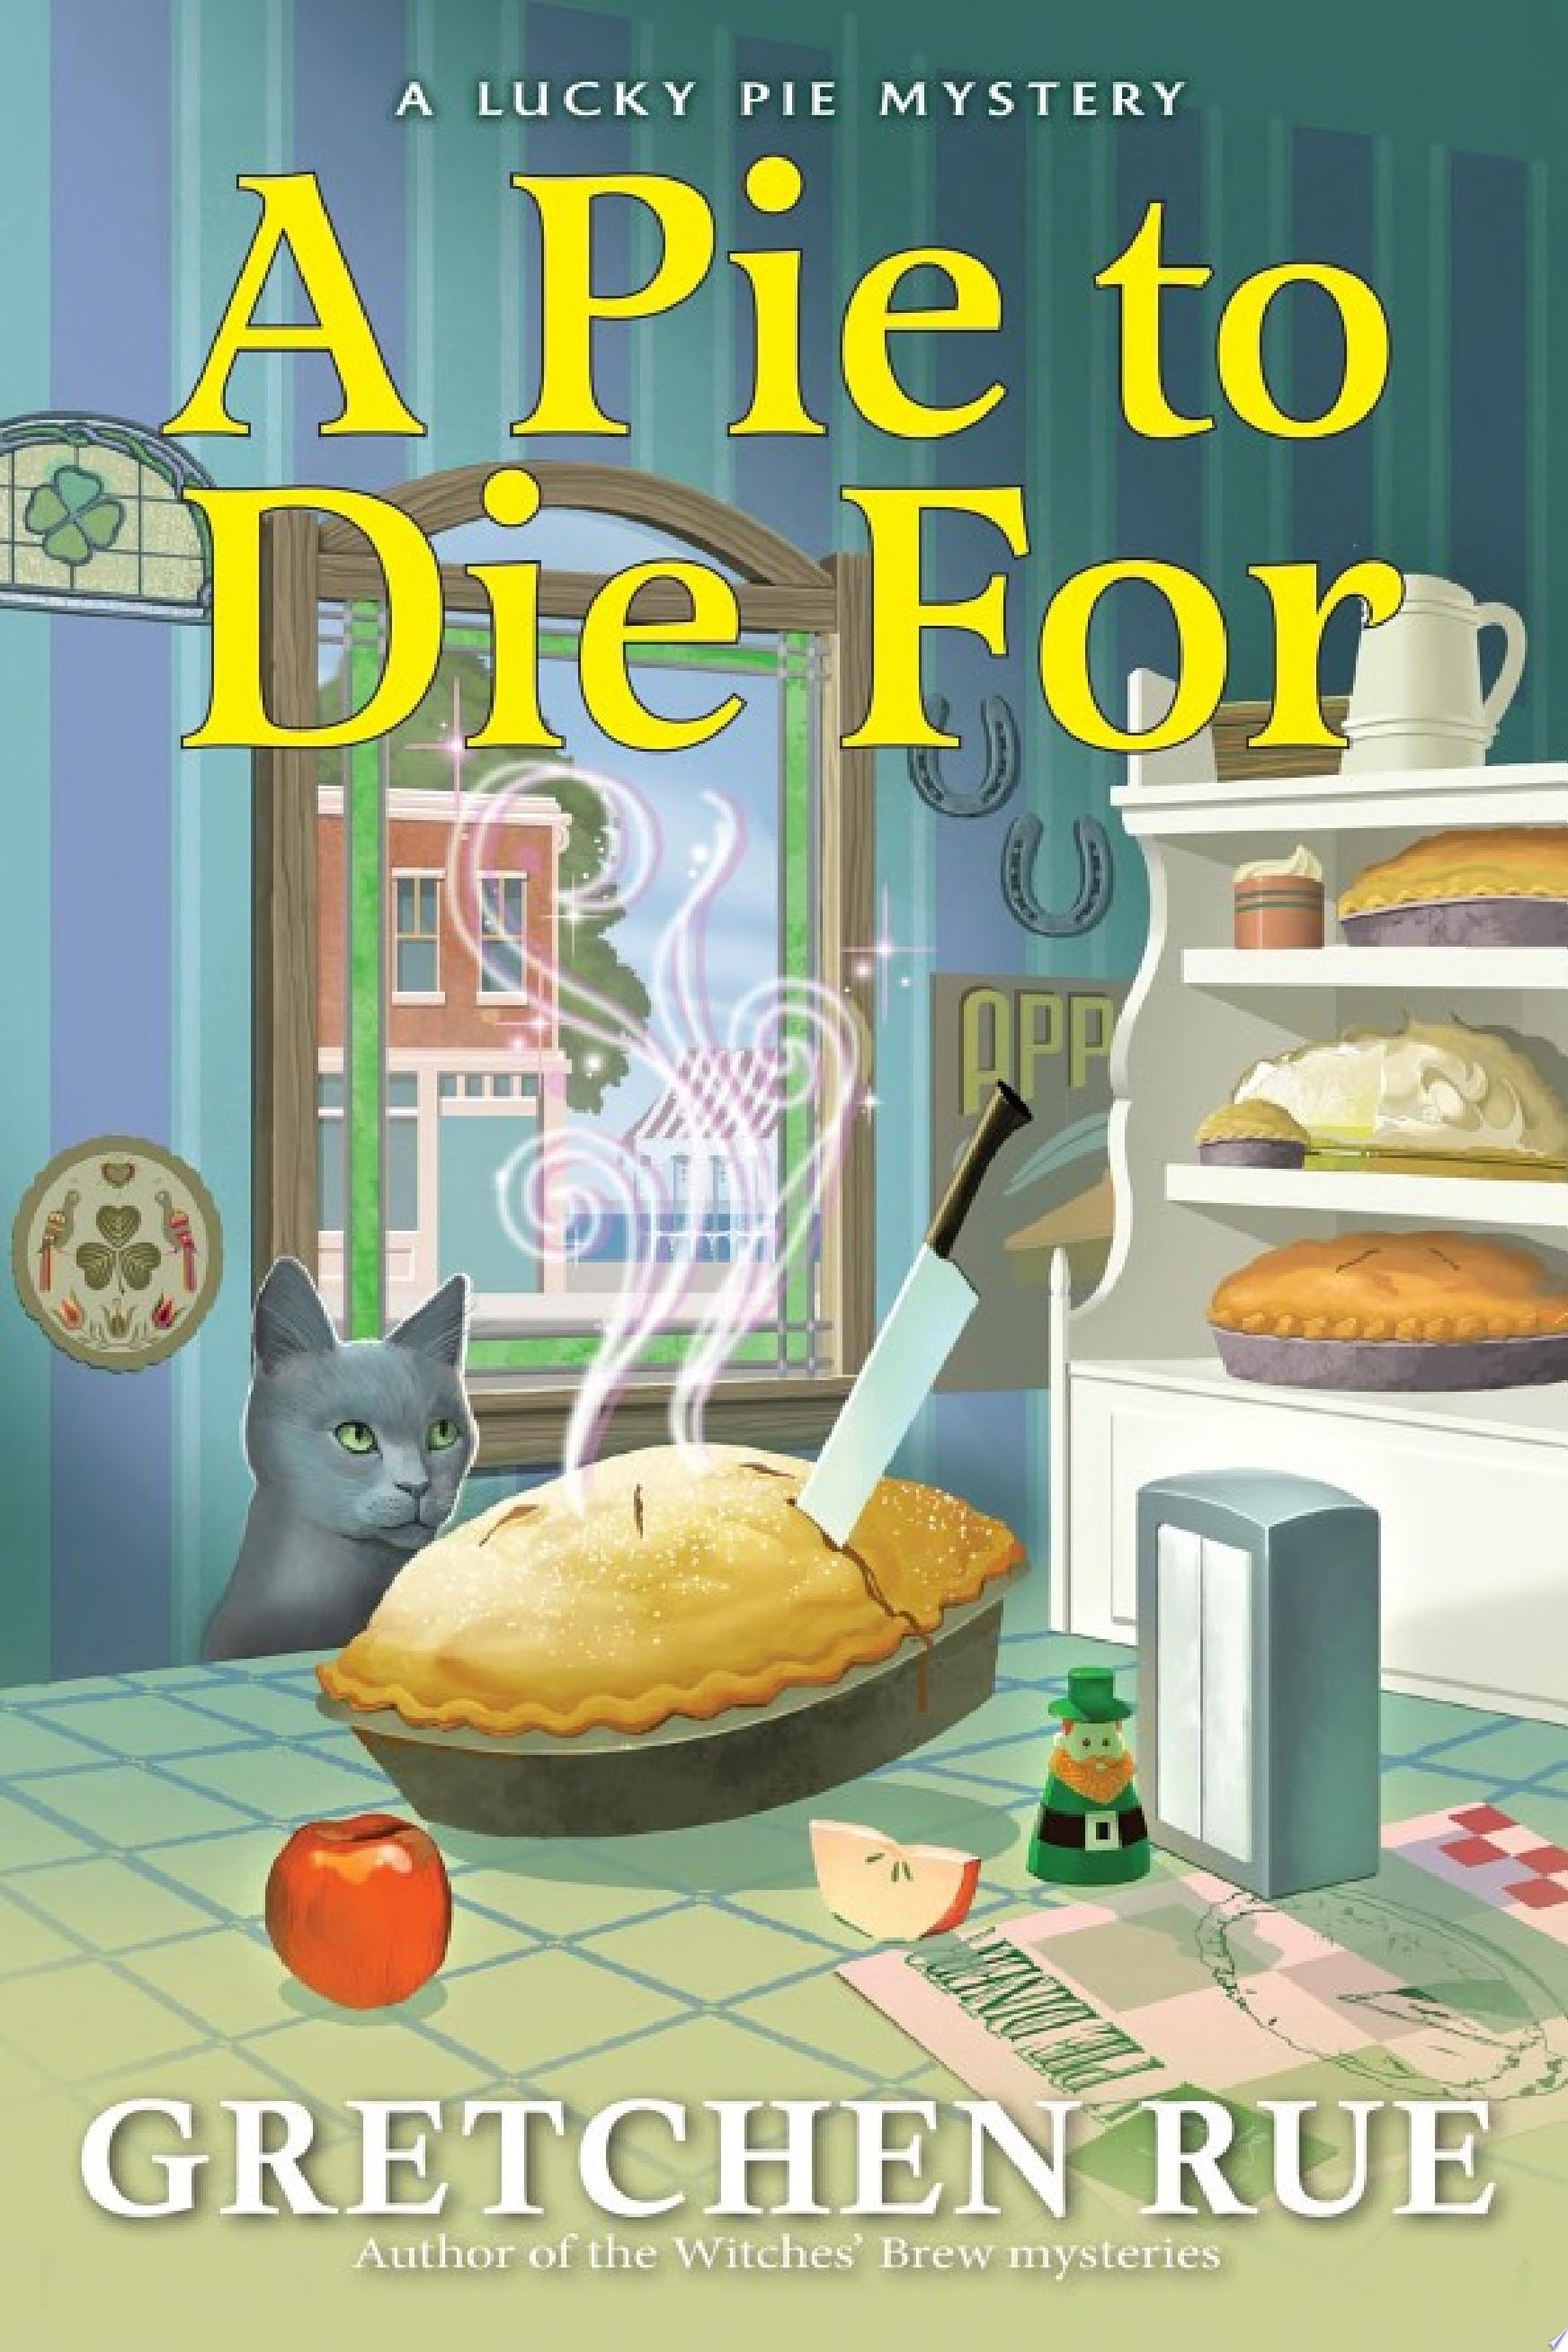 Image for "A Pie to Die For"